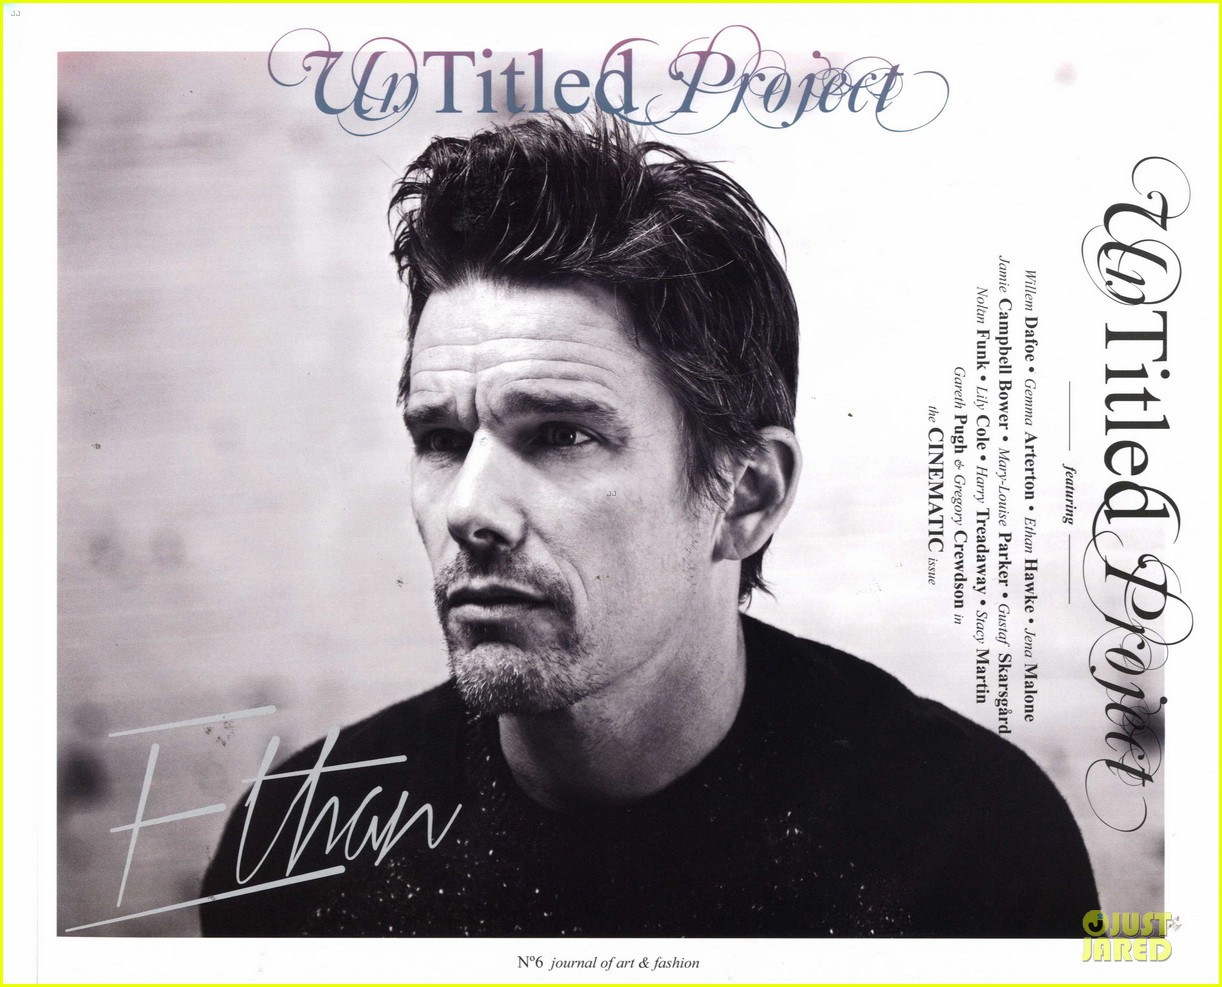 ethan hawke covers untitled project magazine 11